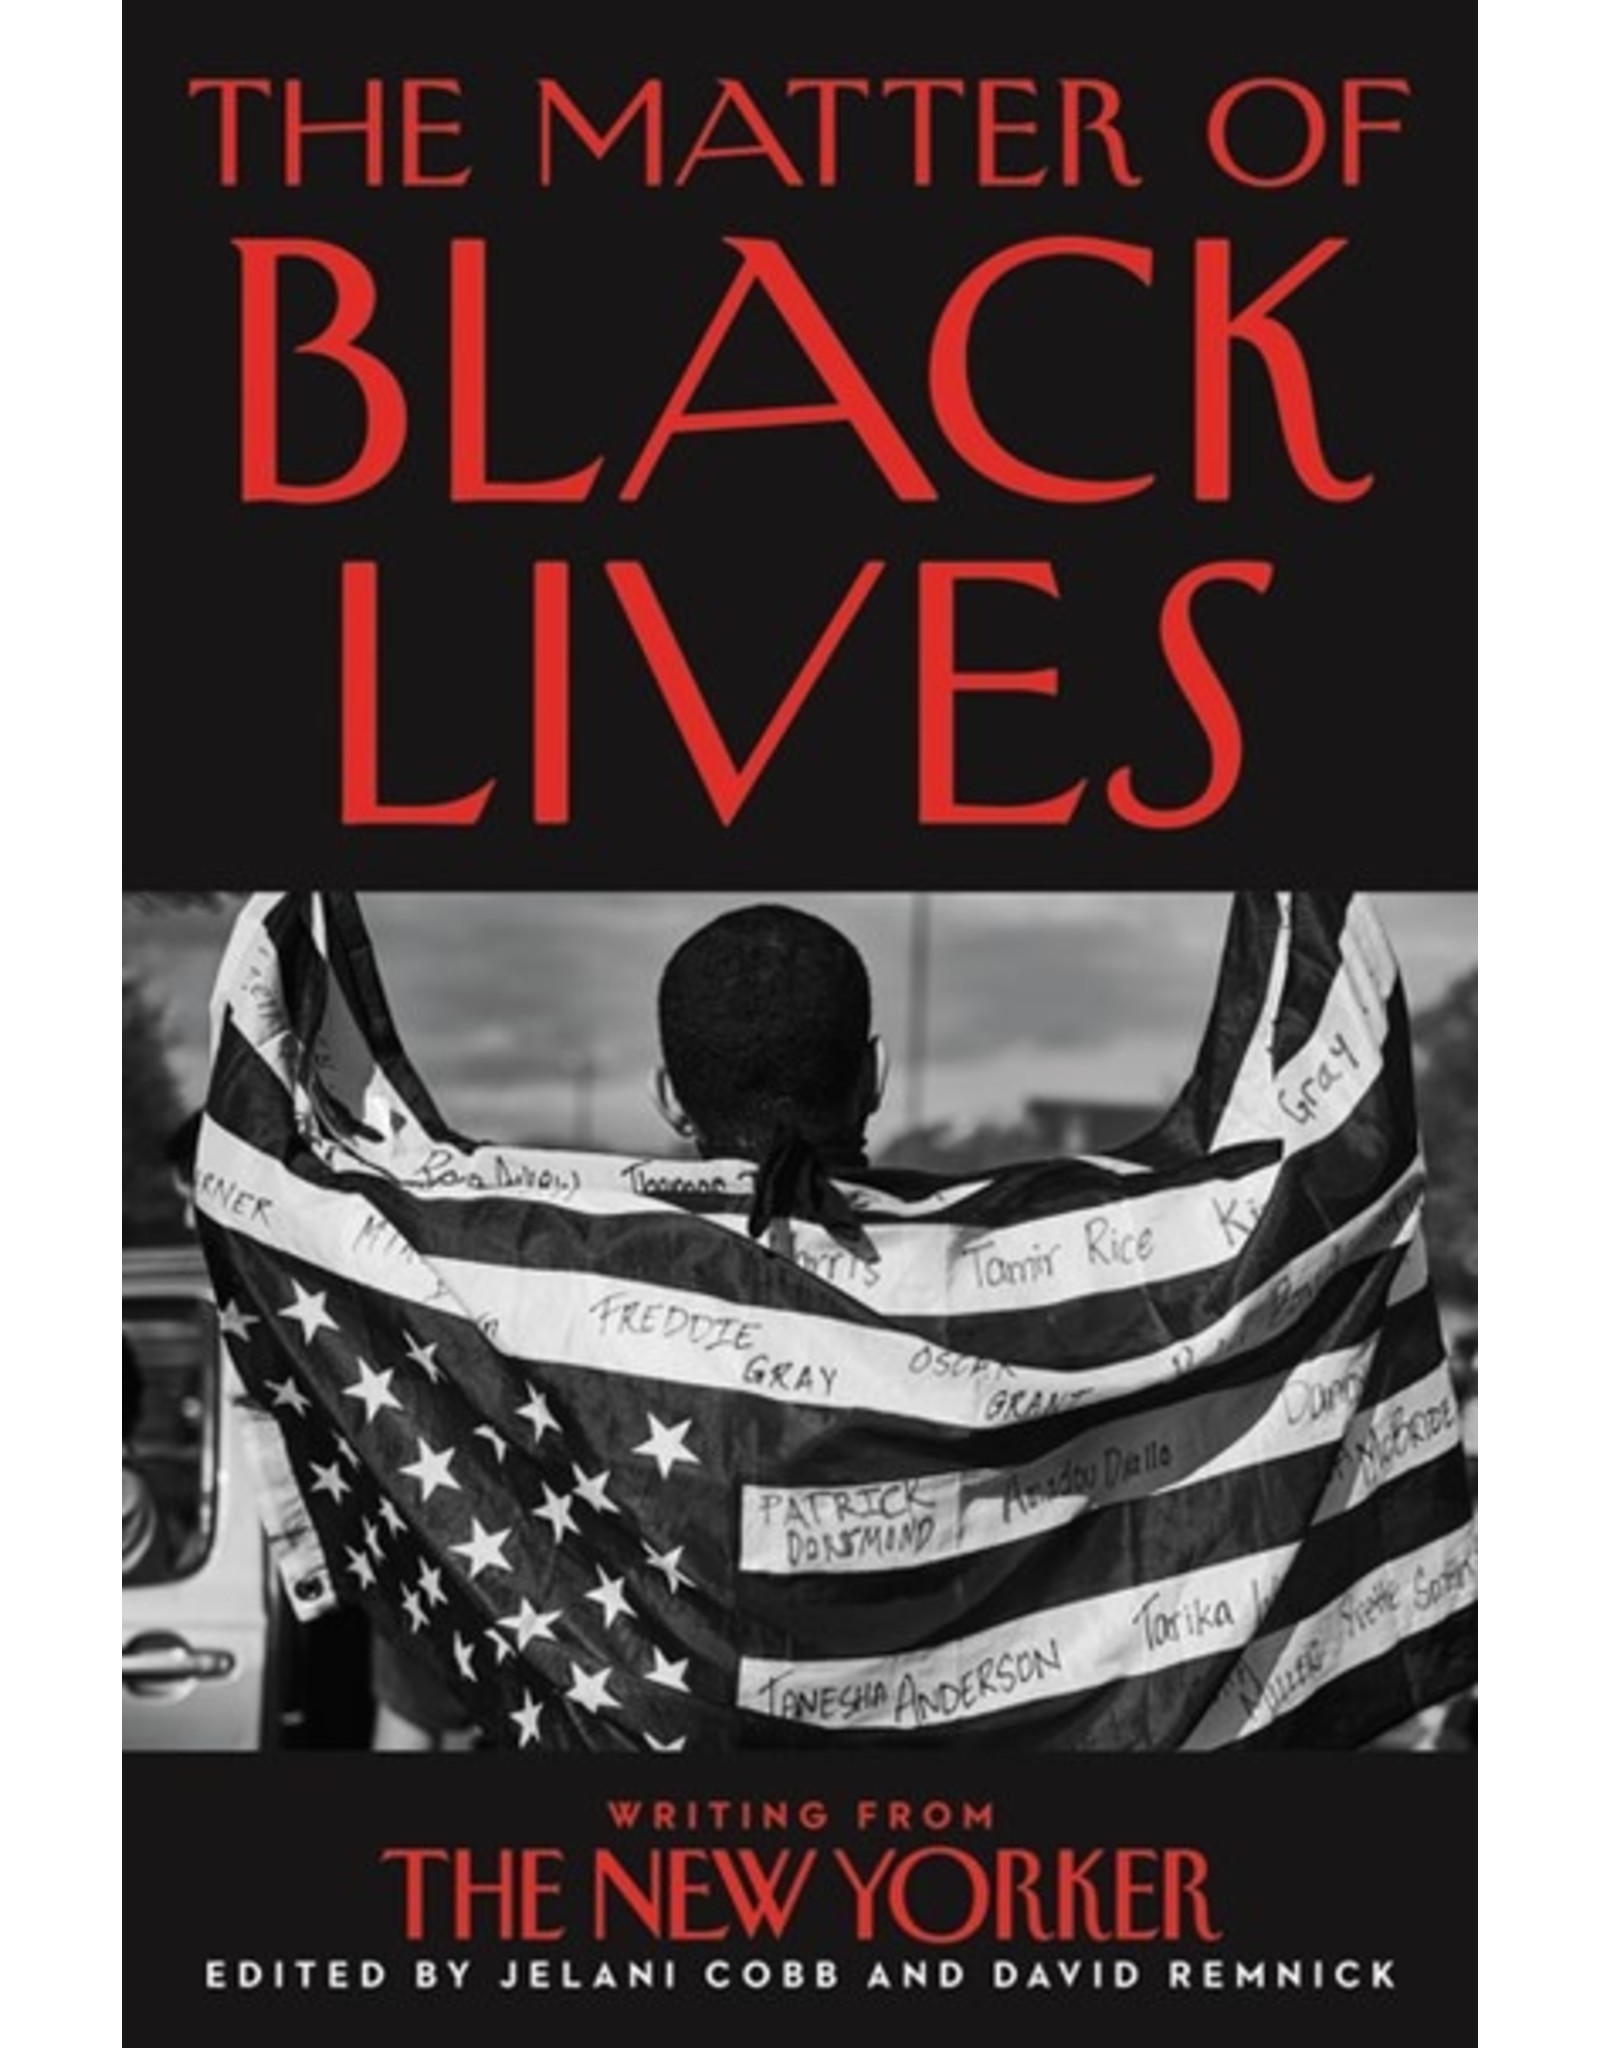 Books The Matter of Black Lives: Writings from The New Yorker edited by Jelani Cobb and David Remnick